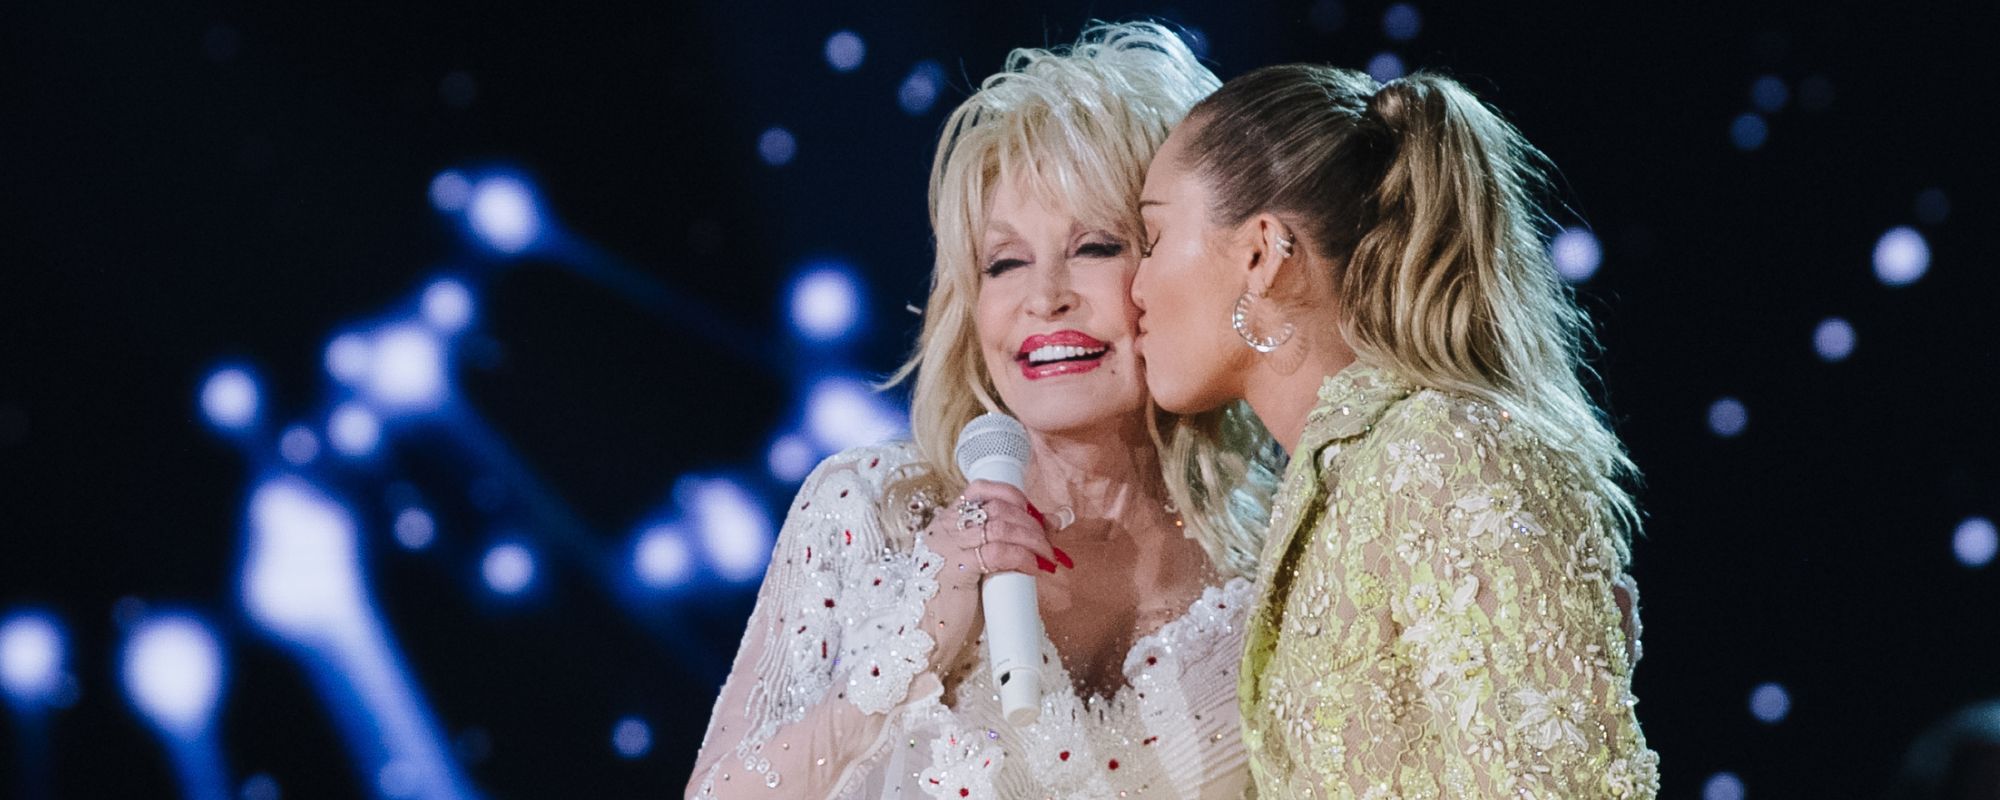 Miley Cyrus: “I Literally Have to Access My Lawyer’s Office” to Contact Dolly Parton